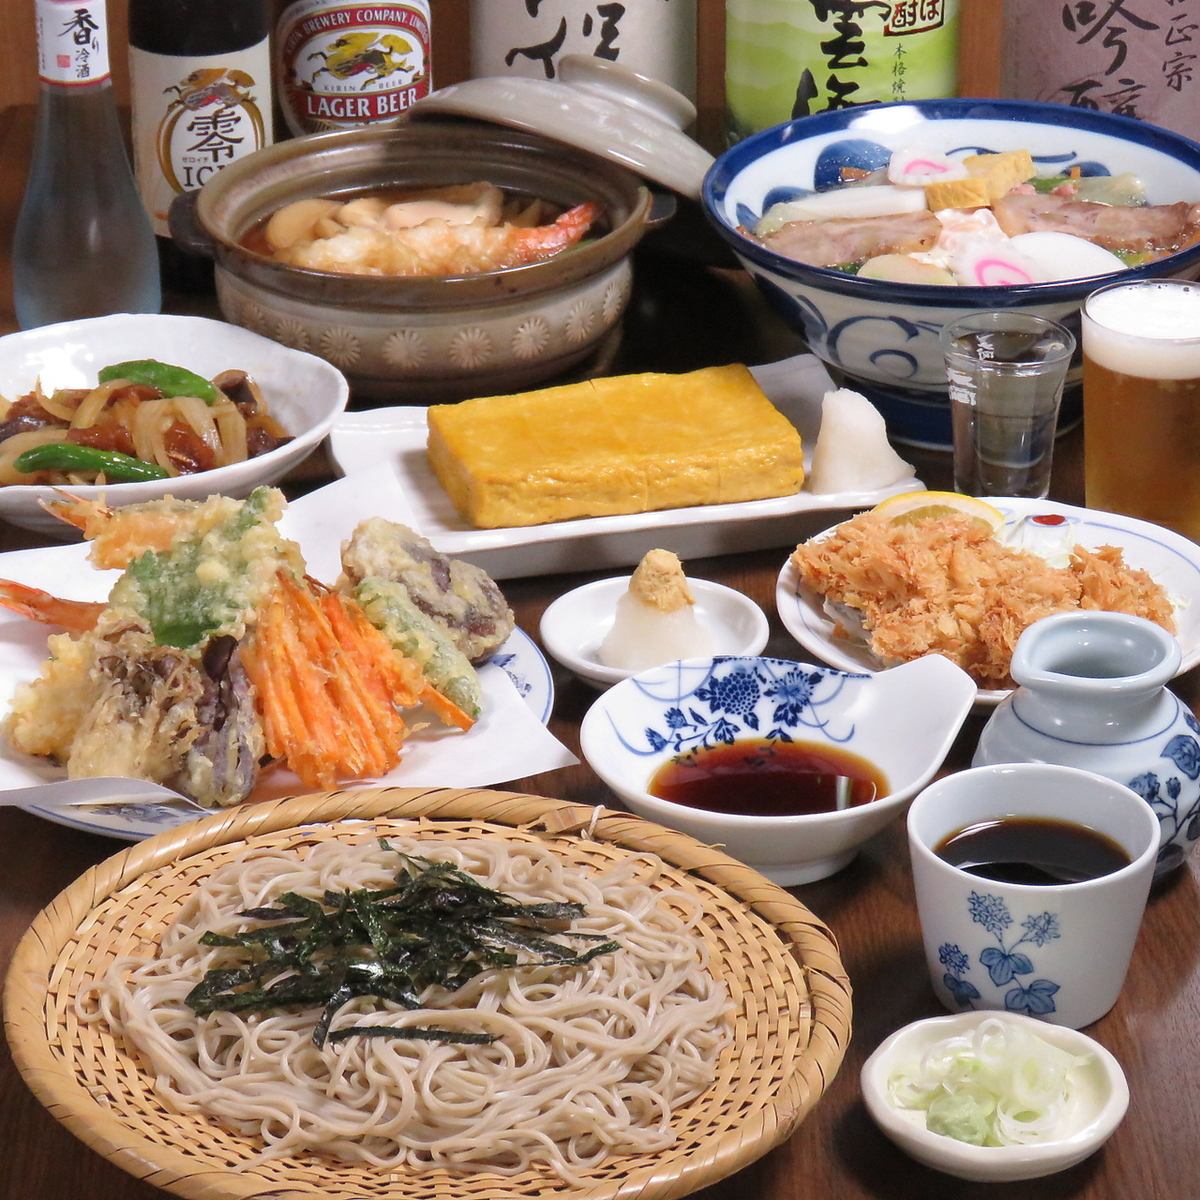 Honhachiman's soba restaurant that sticks to homemade udon and ramen are also available!